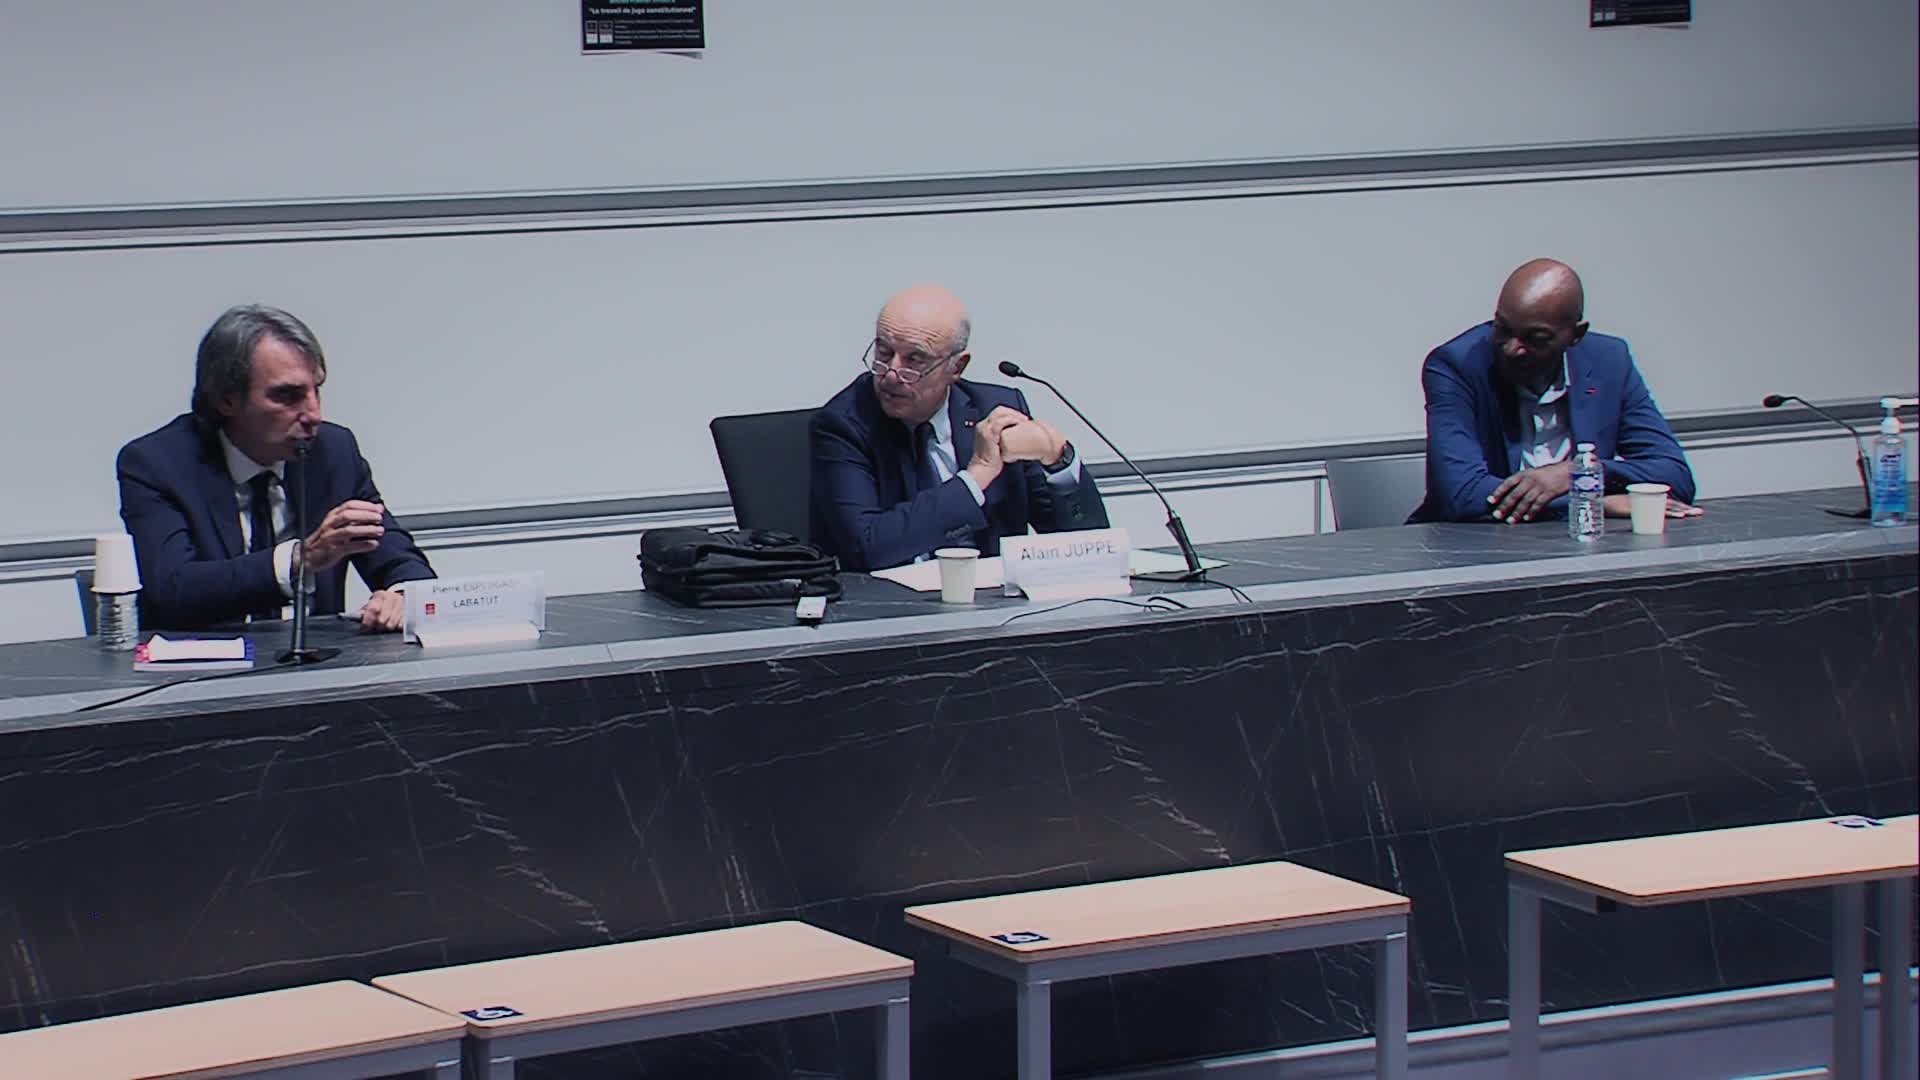 conference-imh-alainjuppe.mp4